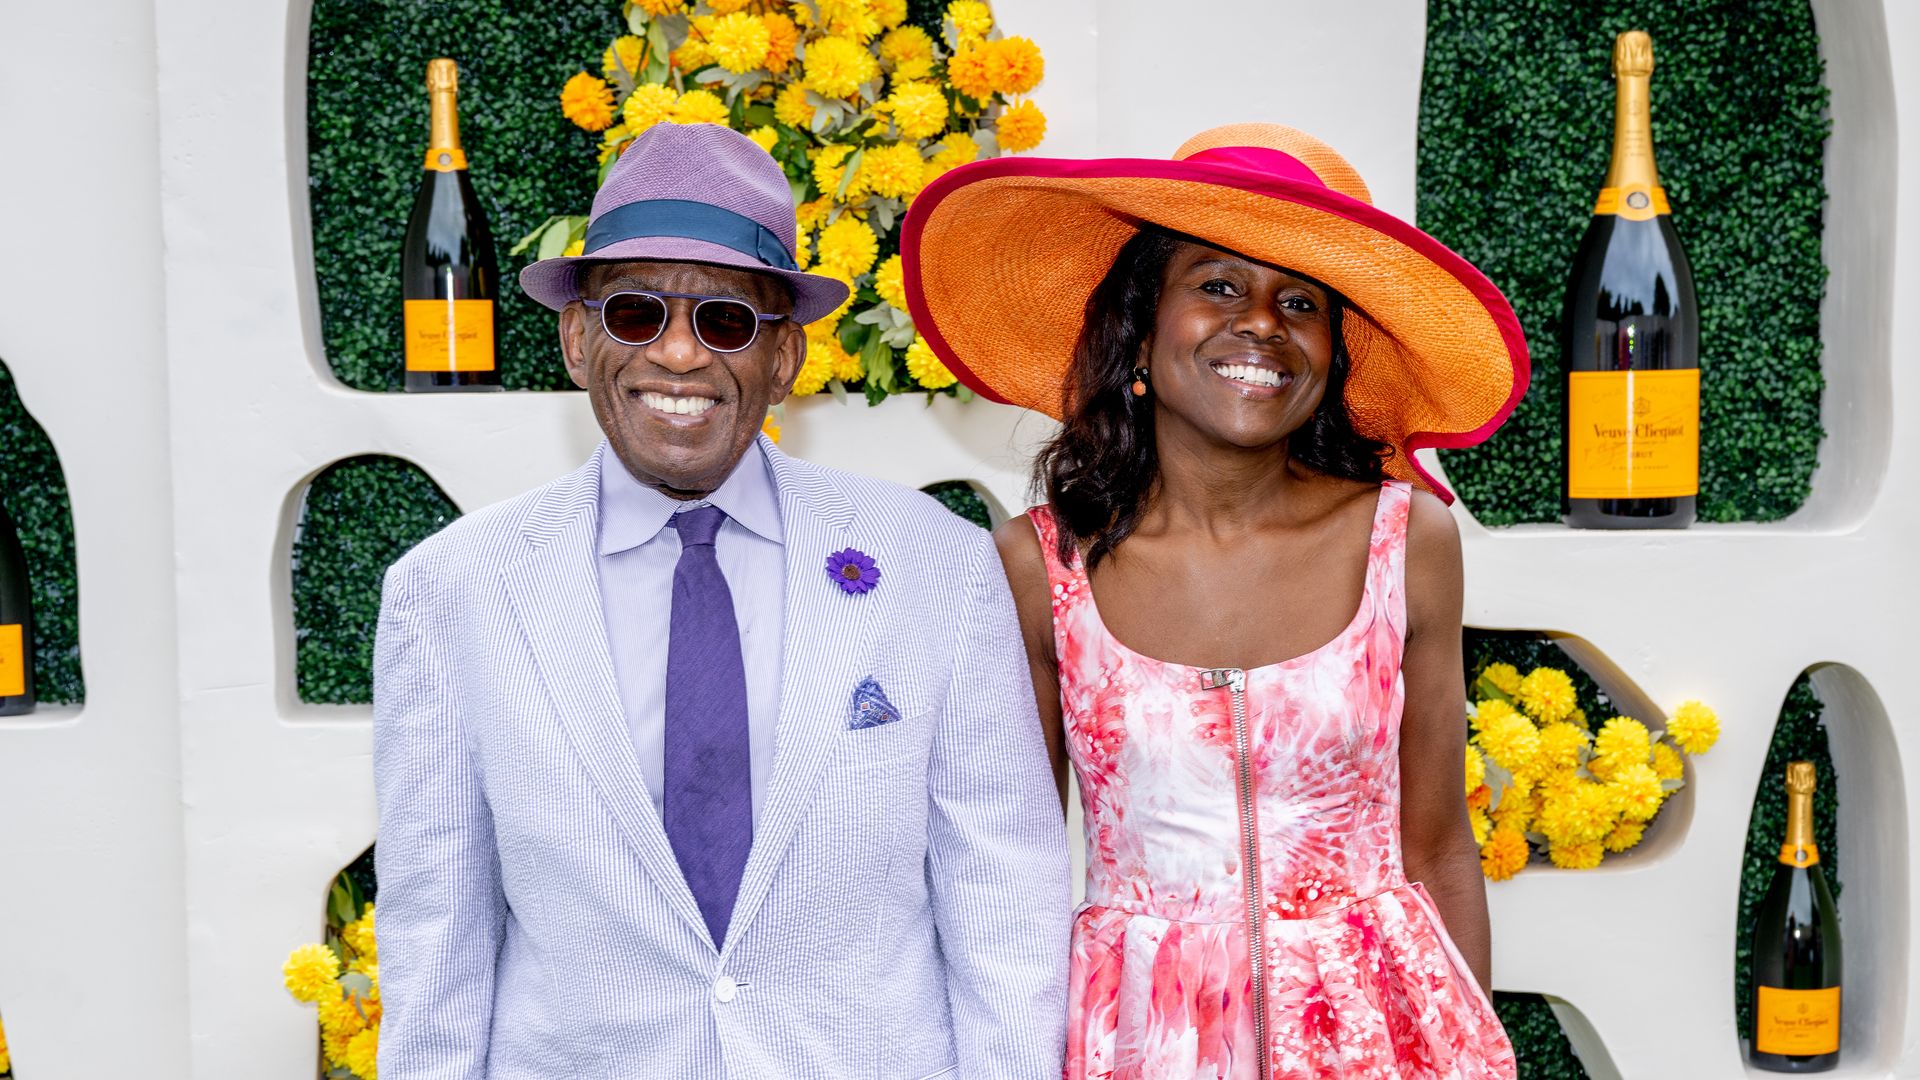 Al Roker and Deborah Roberts attends the 2023 Veuve Clicquot Polo Classic at Liberty State Park on June 03, 2023 in Jersey City, New Jersey